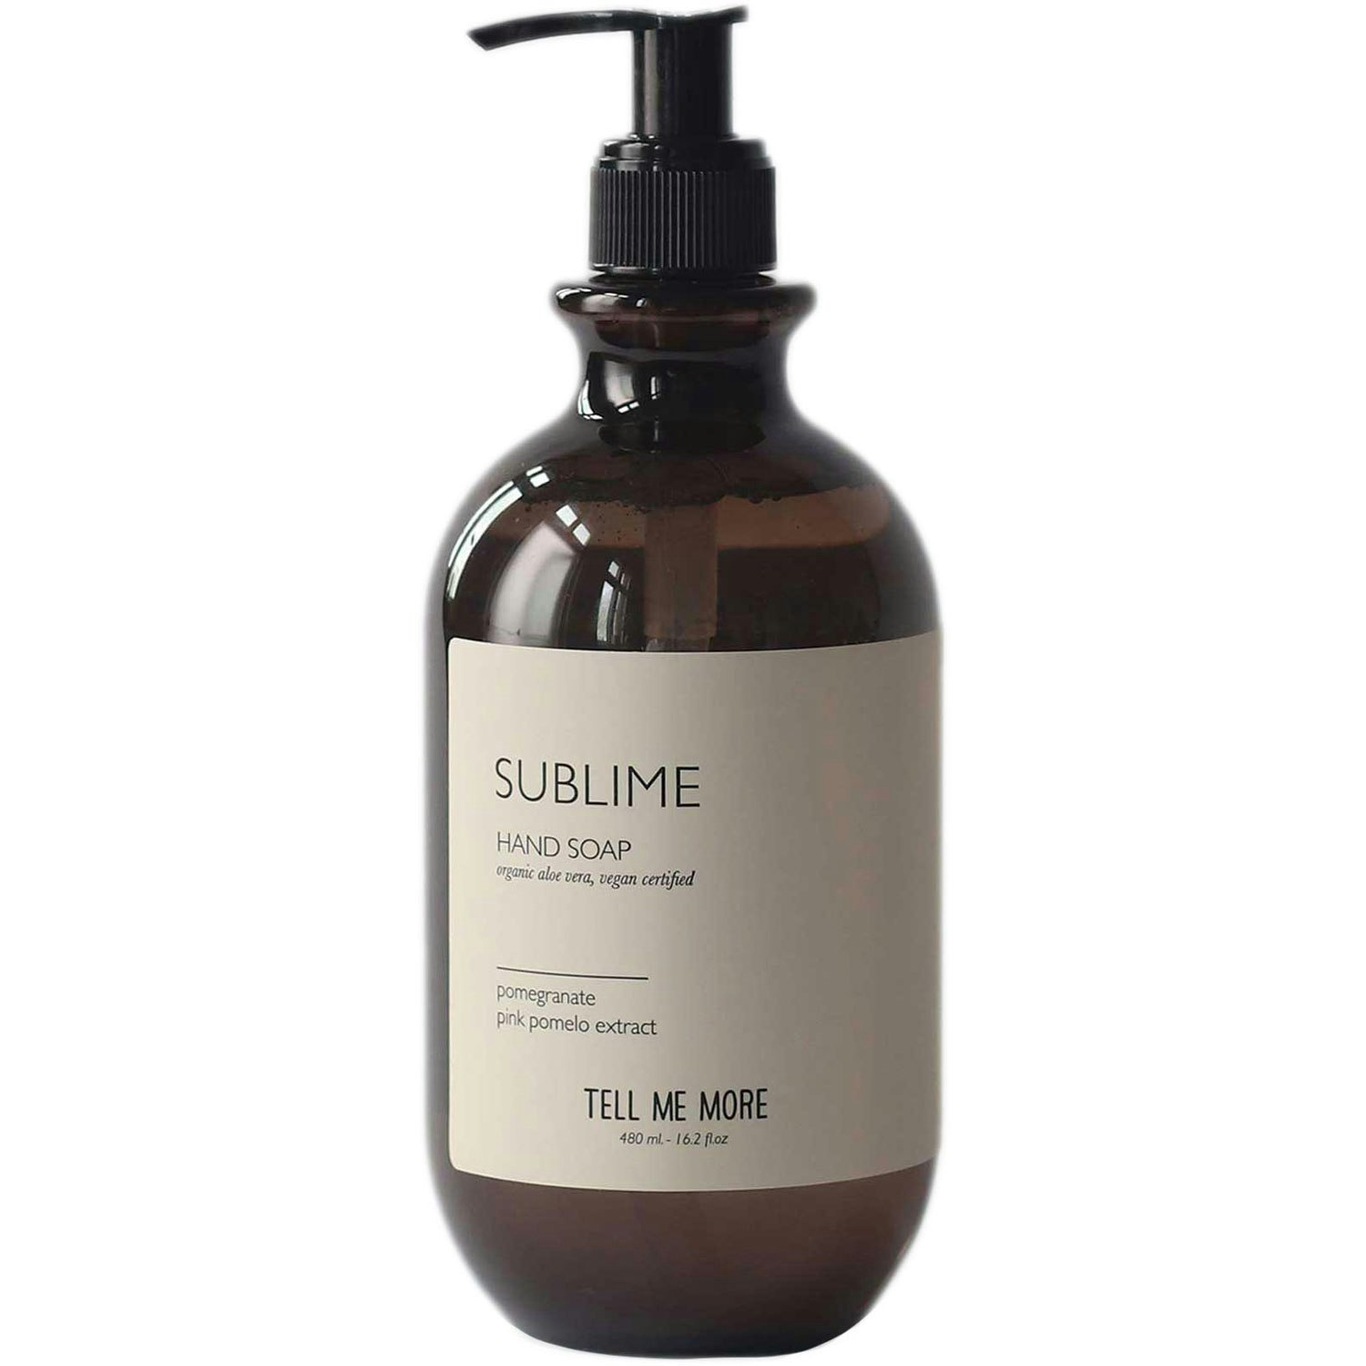 Hand Soap 480 ml, Sublime